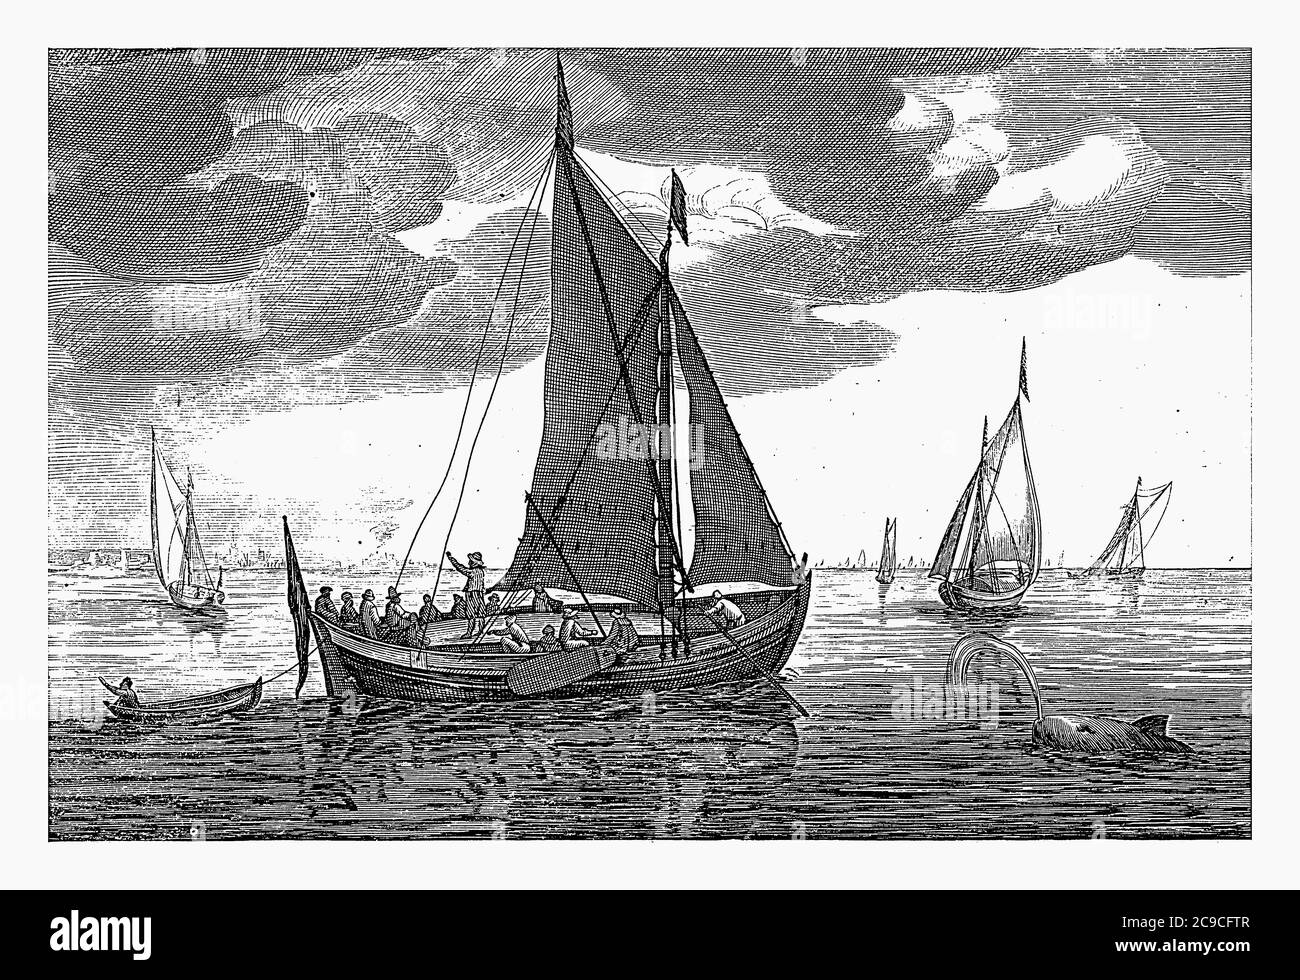 Heude or heu, Robert de Baudous (possibly), after Jan Porcellis, 1670 - 1726 A heude or heu on the water, vintage engraving. Stock Photo